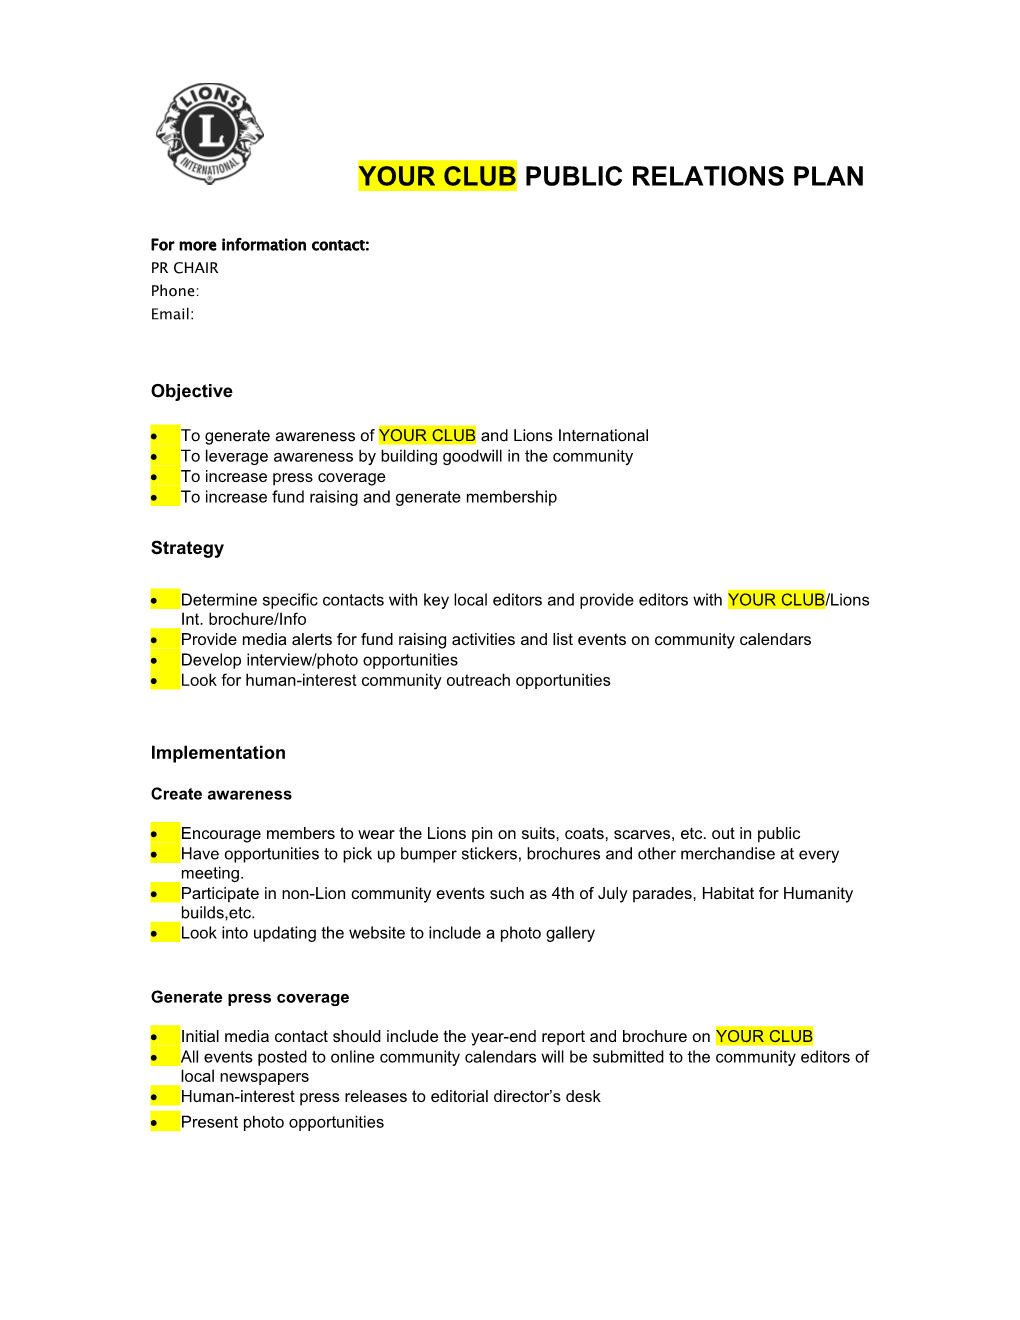 Your Club Public Relations Plan